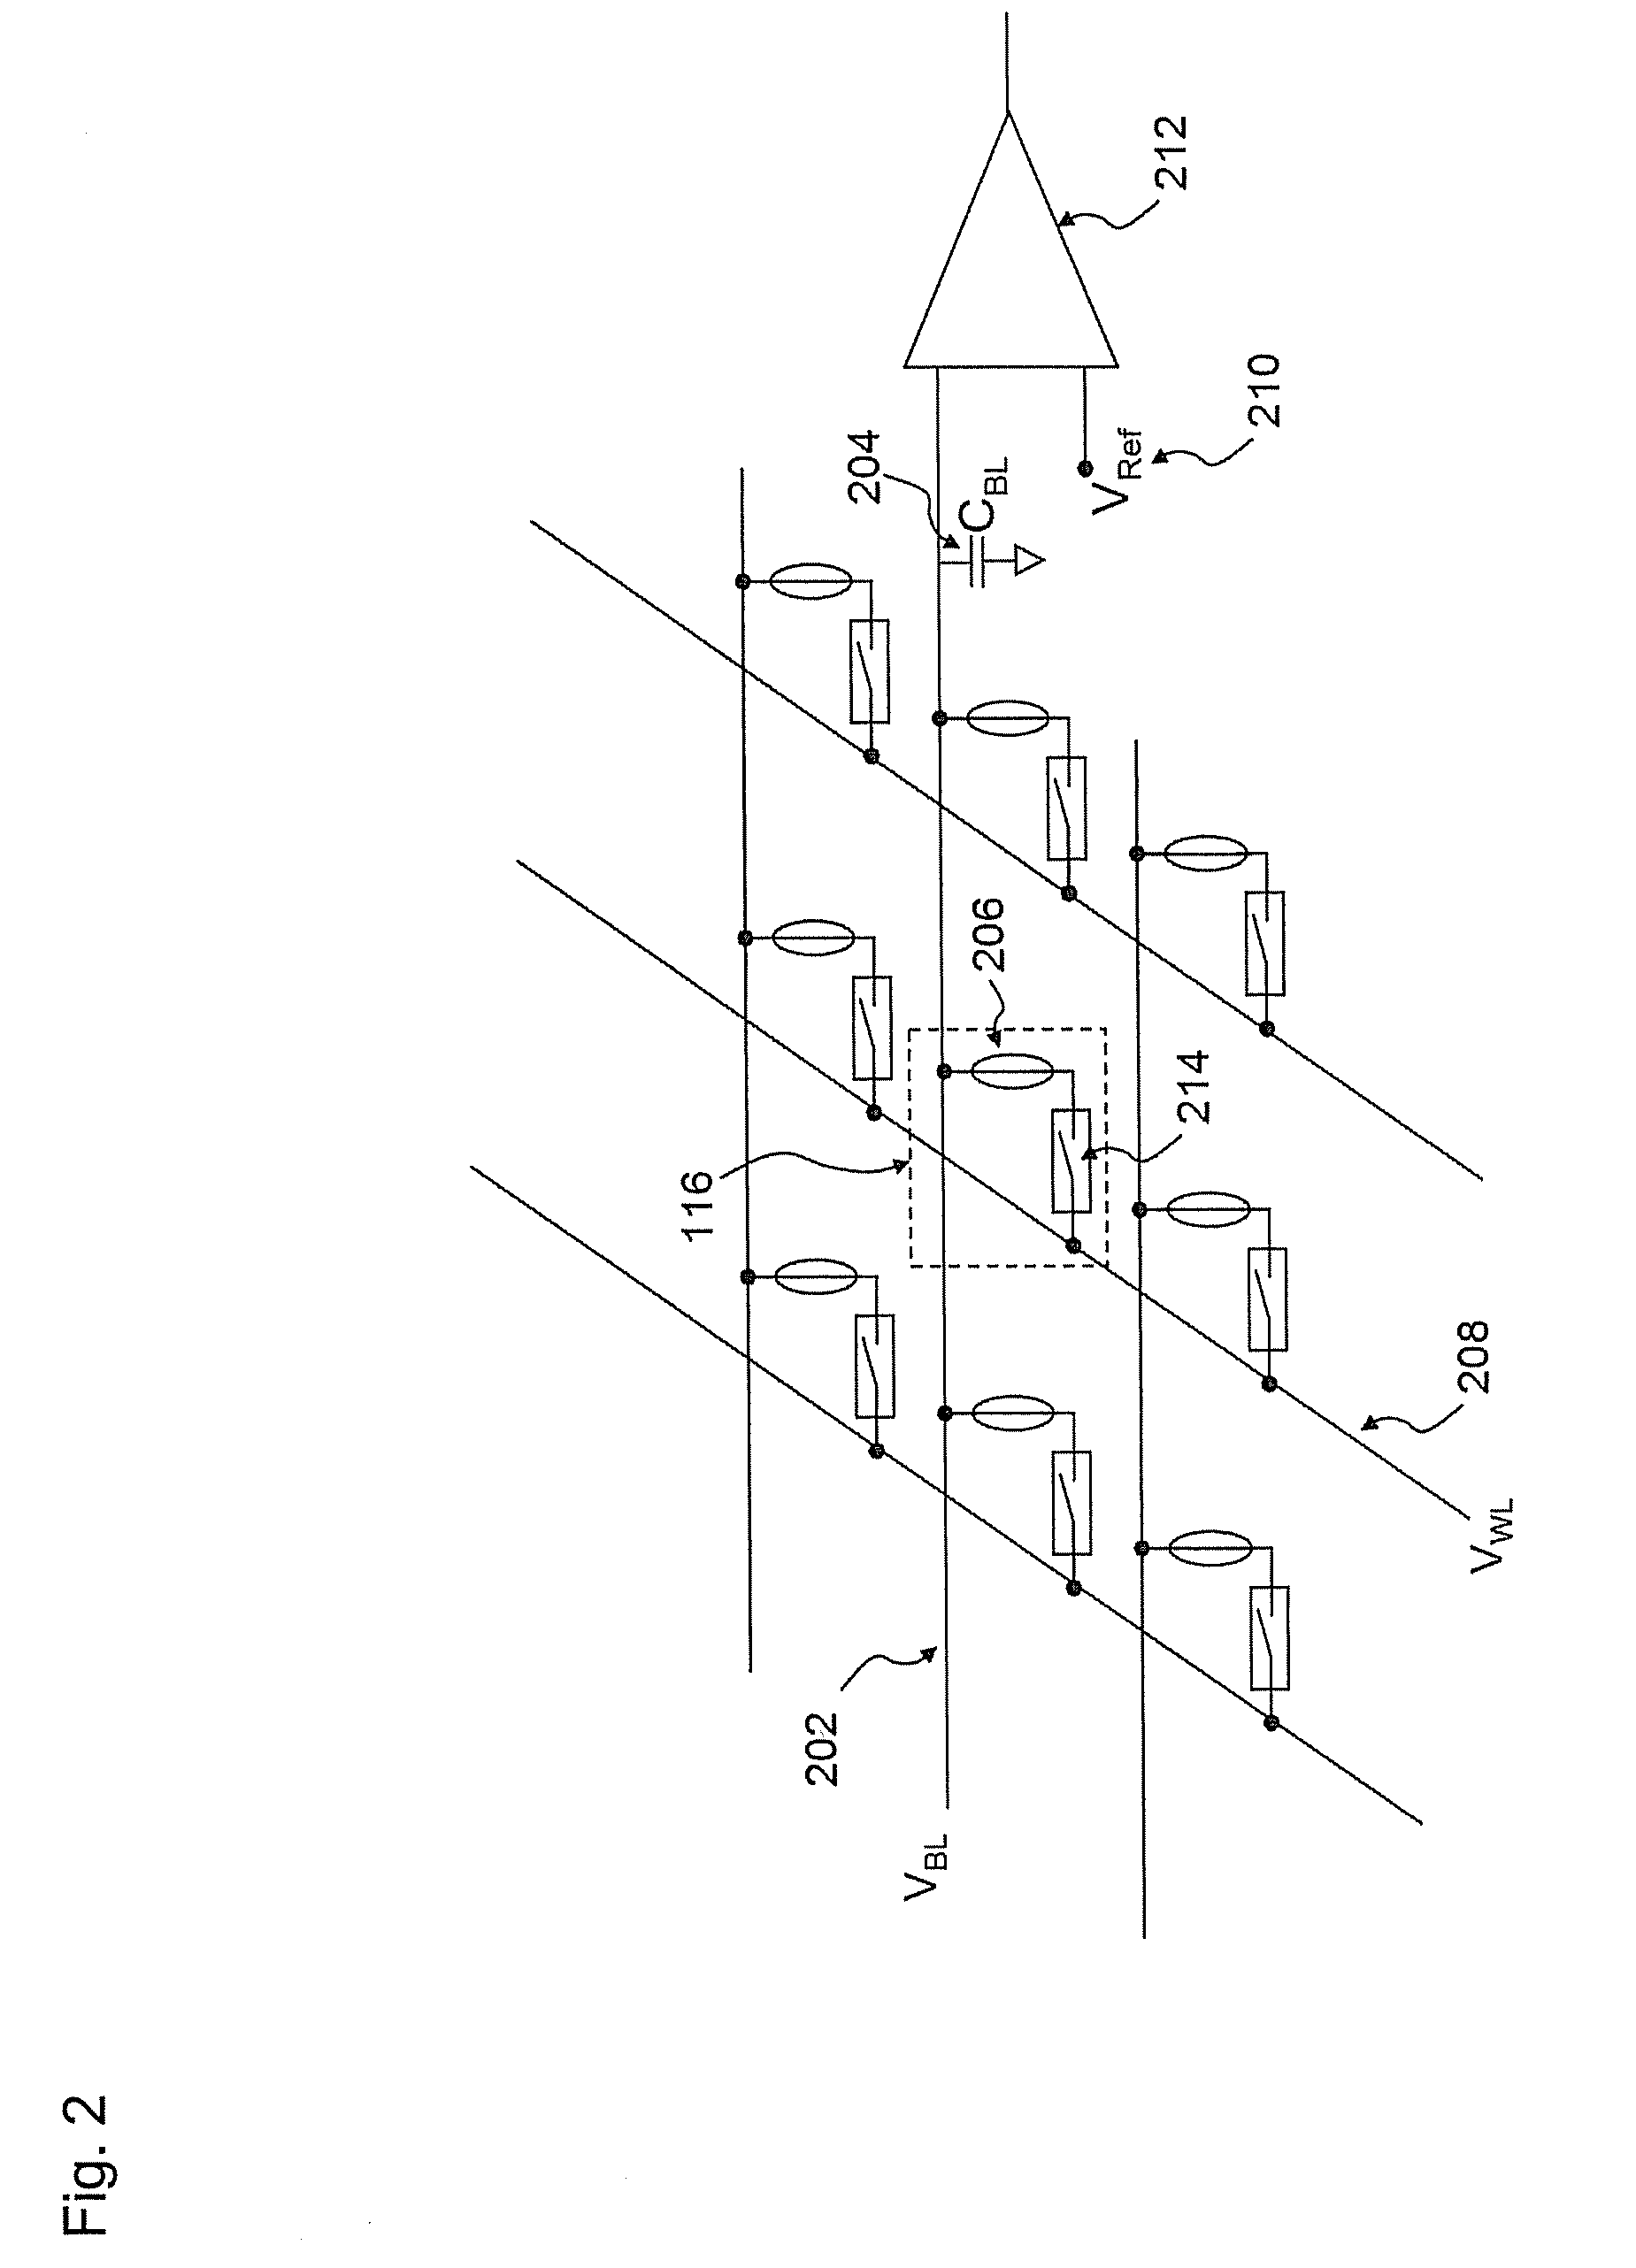 Measurement method for reading multi-level memory cell utilizing measurement time delay as the characteristic parameter for level definition